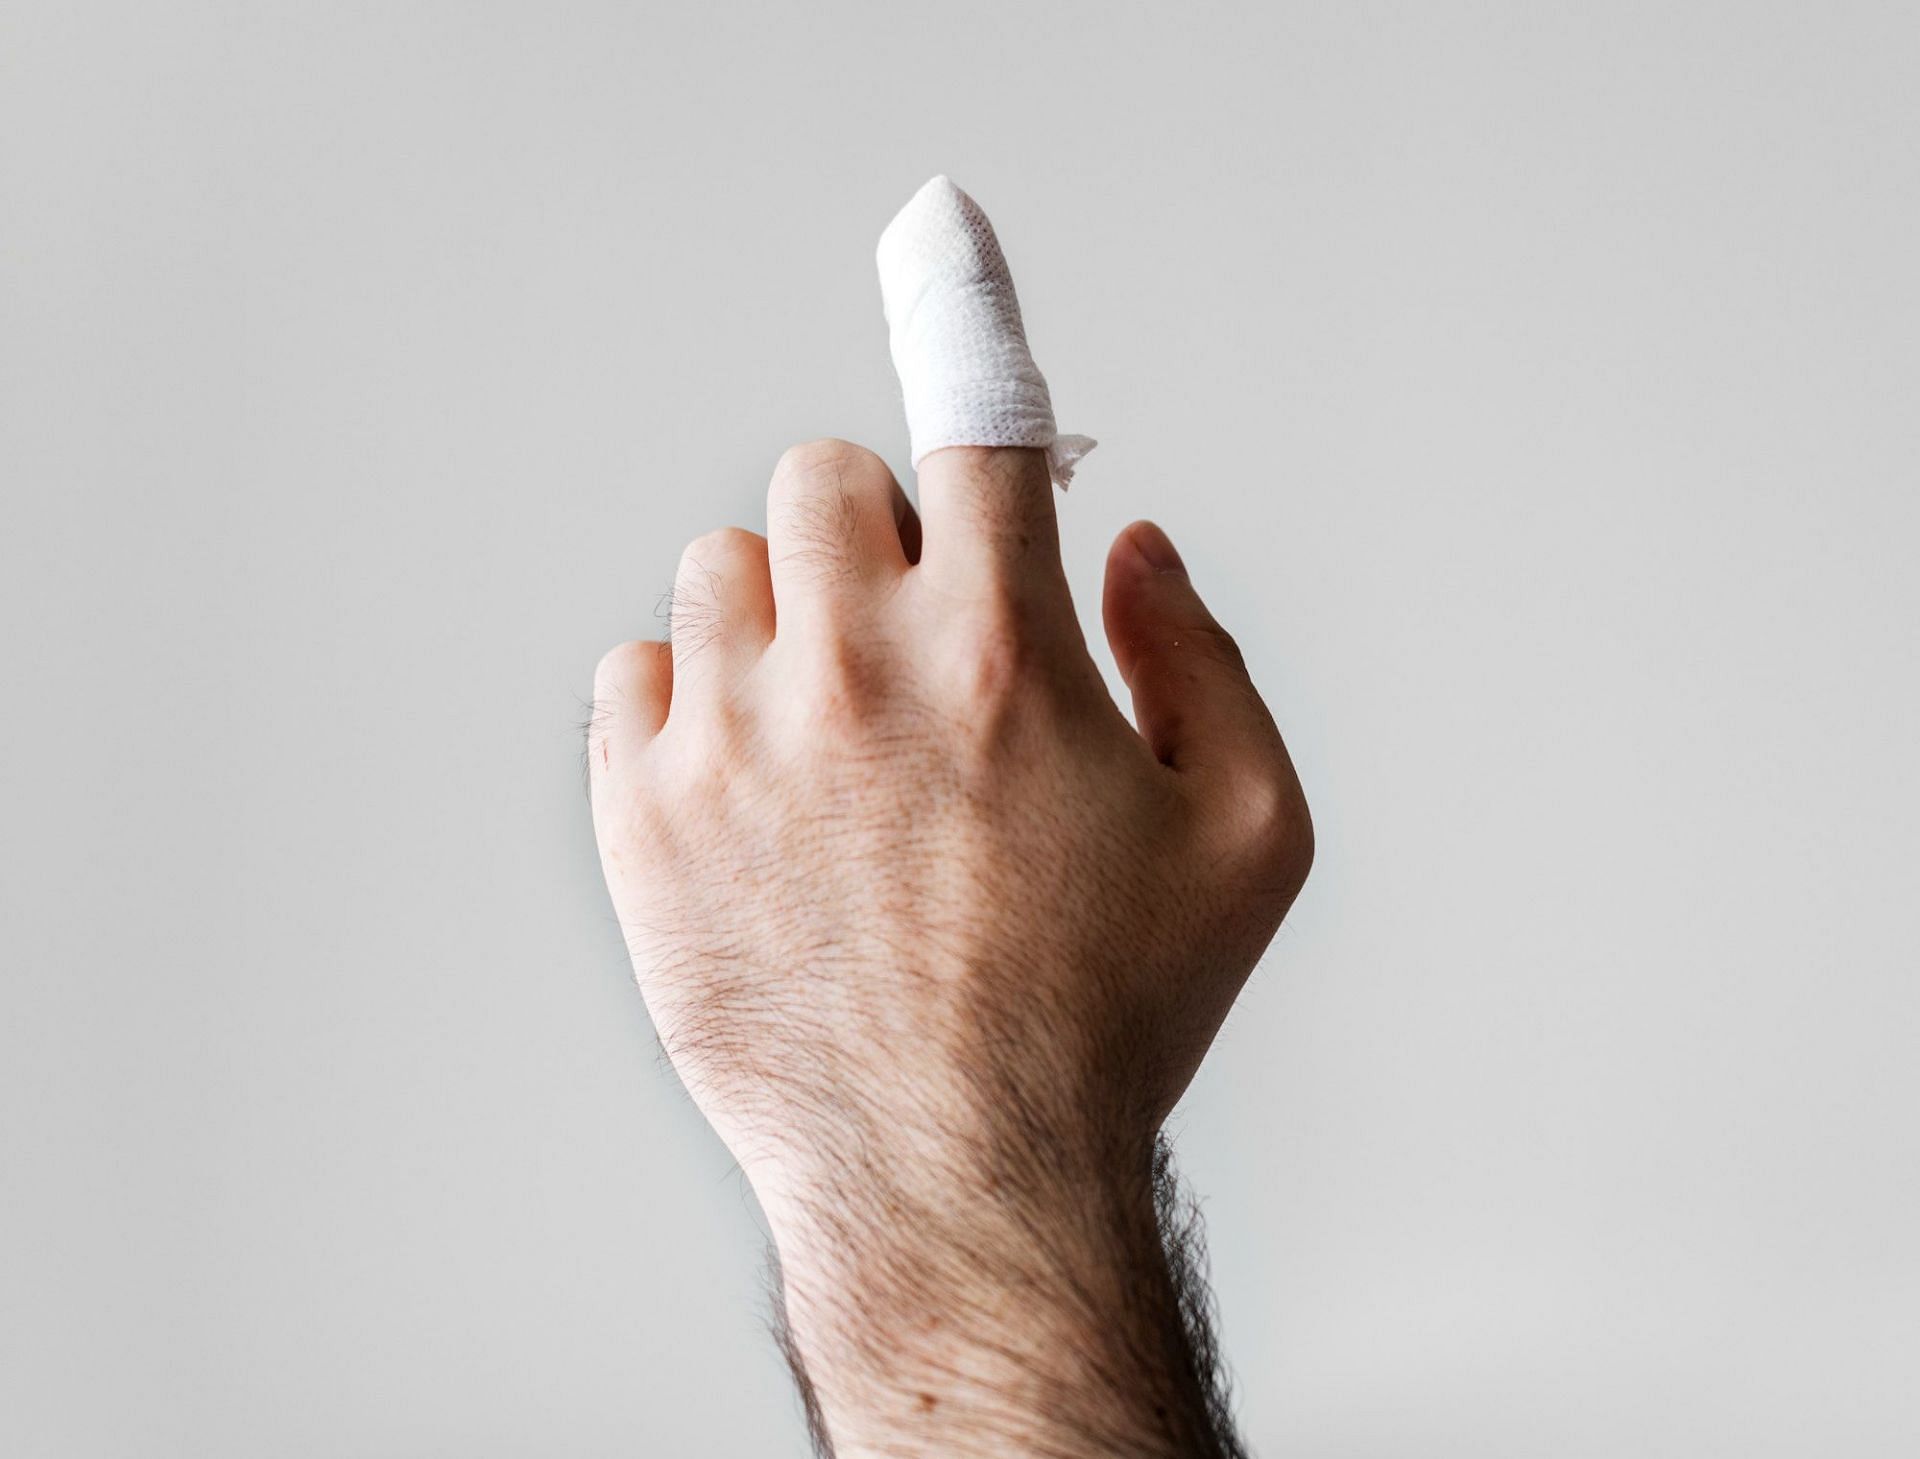 What is a jammed finger: Is it broken or jammed? (Image by rawpixel.com on Freepik)